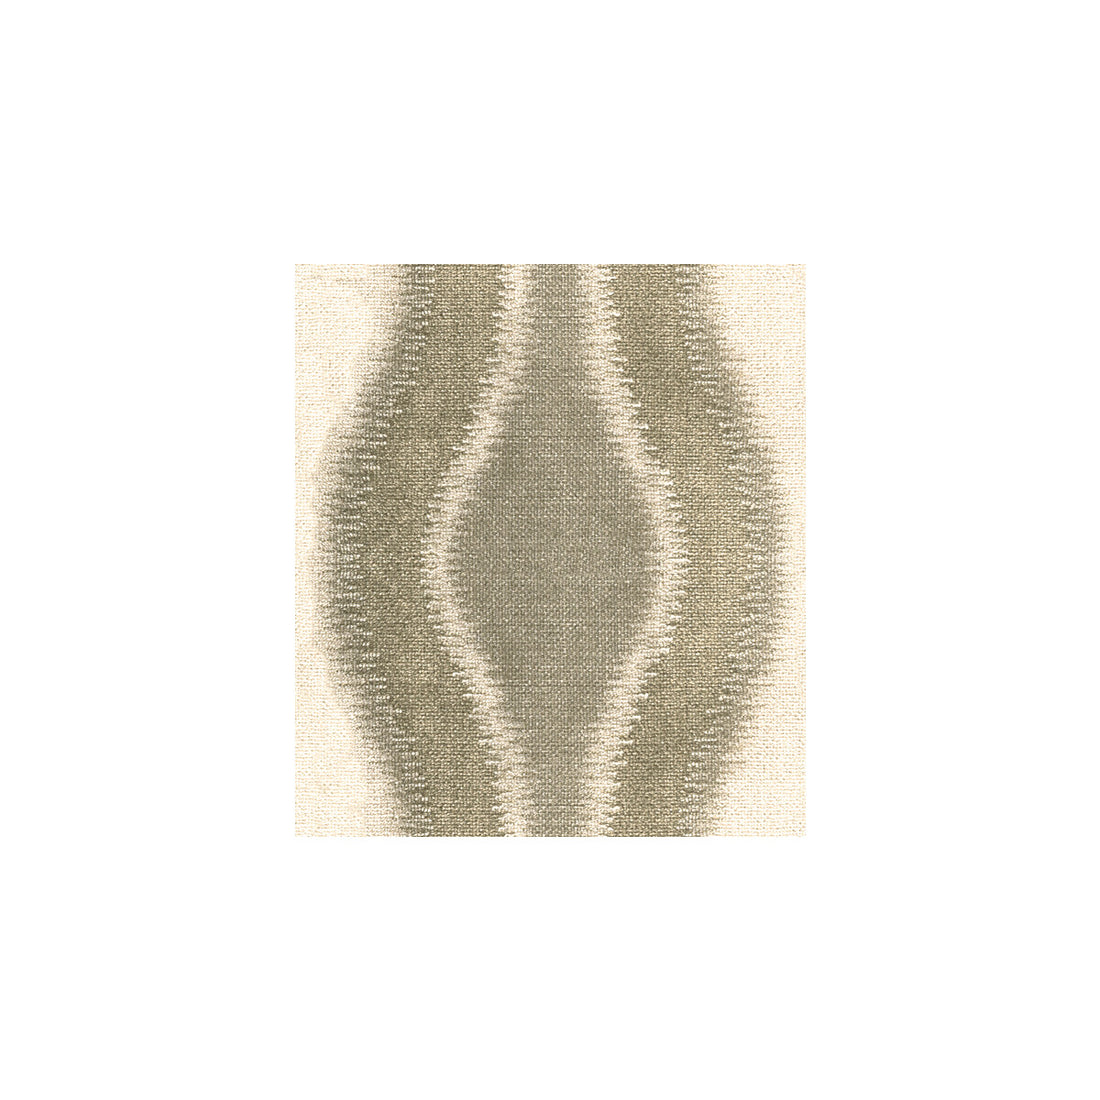 Soft Aura fabric in silver color - pattern 32632.16.0 - by Kravet Couture in the Modern Luxe collection